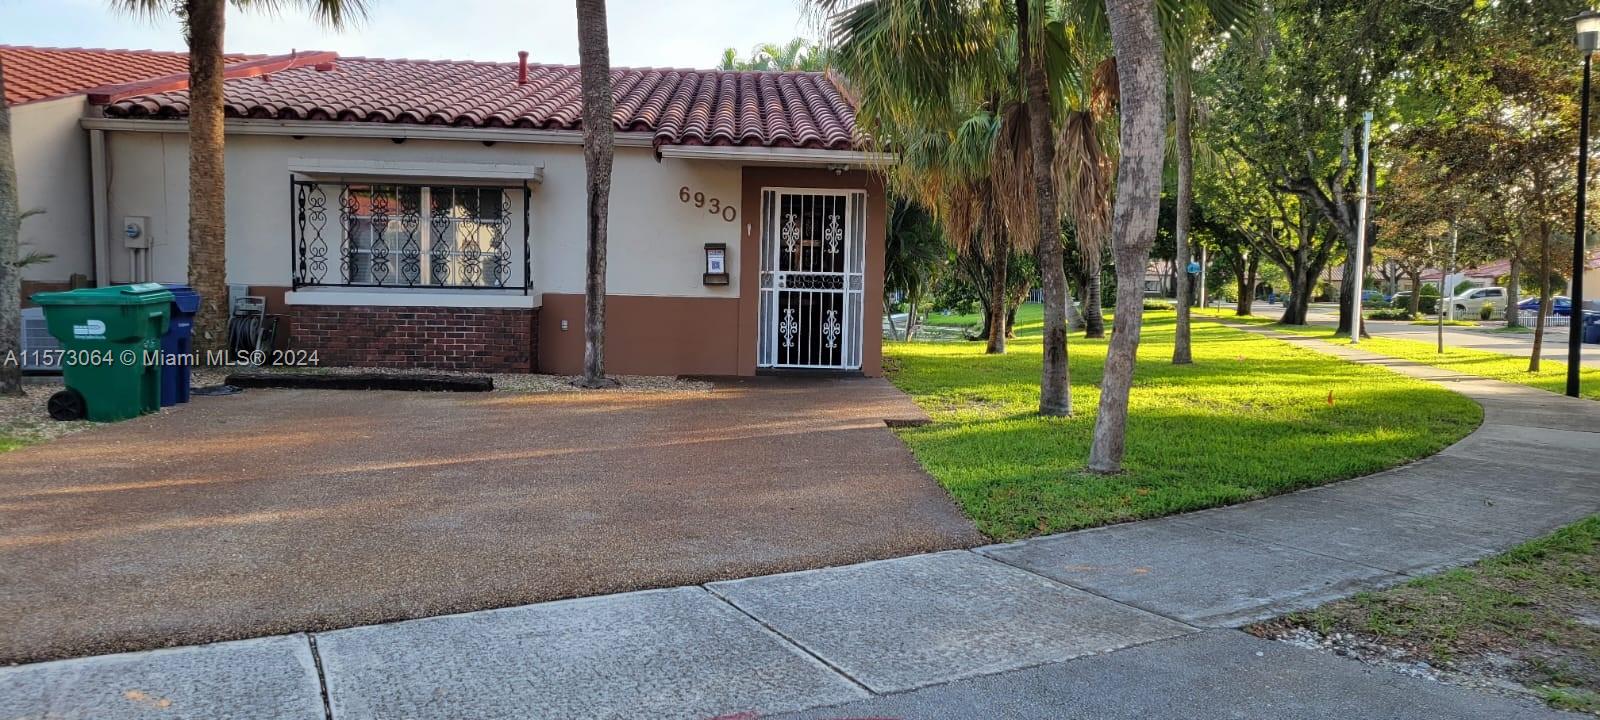 6930  Holly Rd  For Sale A11573064, FL